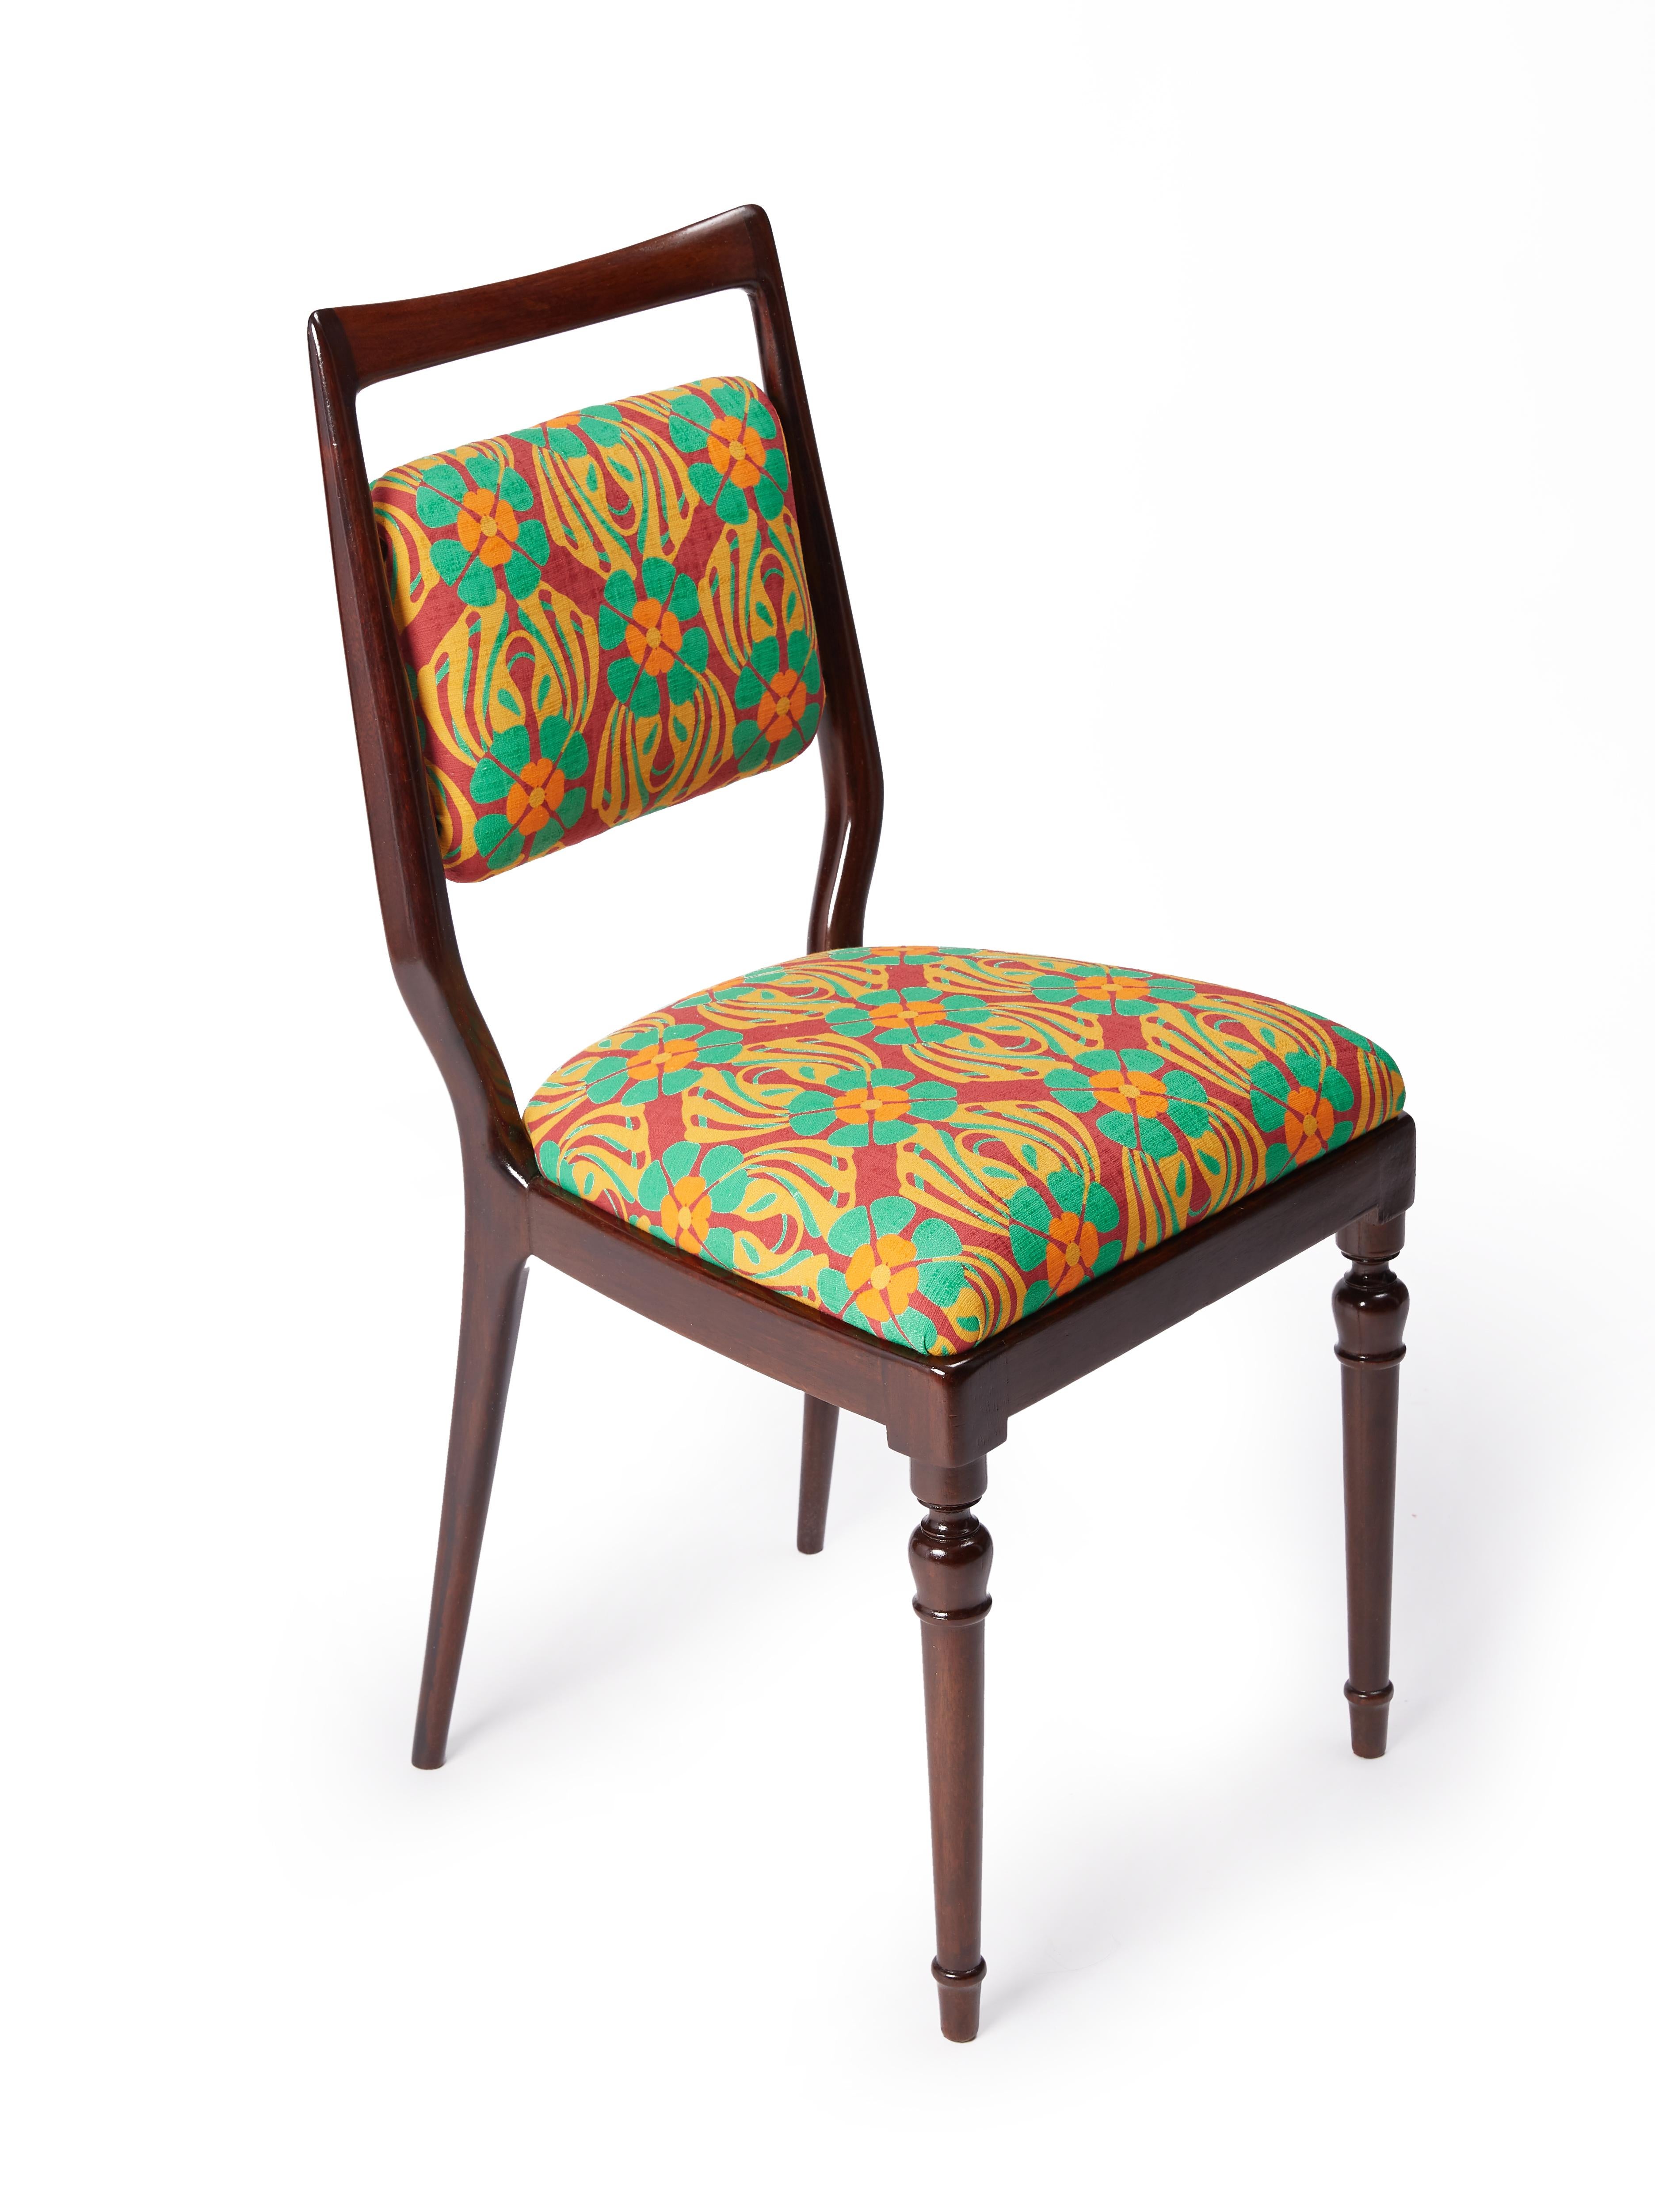 Set of six vintage cherrywood chairs 
Antiques meet awesome prints in this set of six vintage chairs unearthed from an aristocratic villa in Brianza especially for La DoubleJ’s exclusive collaboration with the world-class antique marketplace,